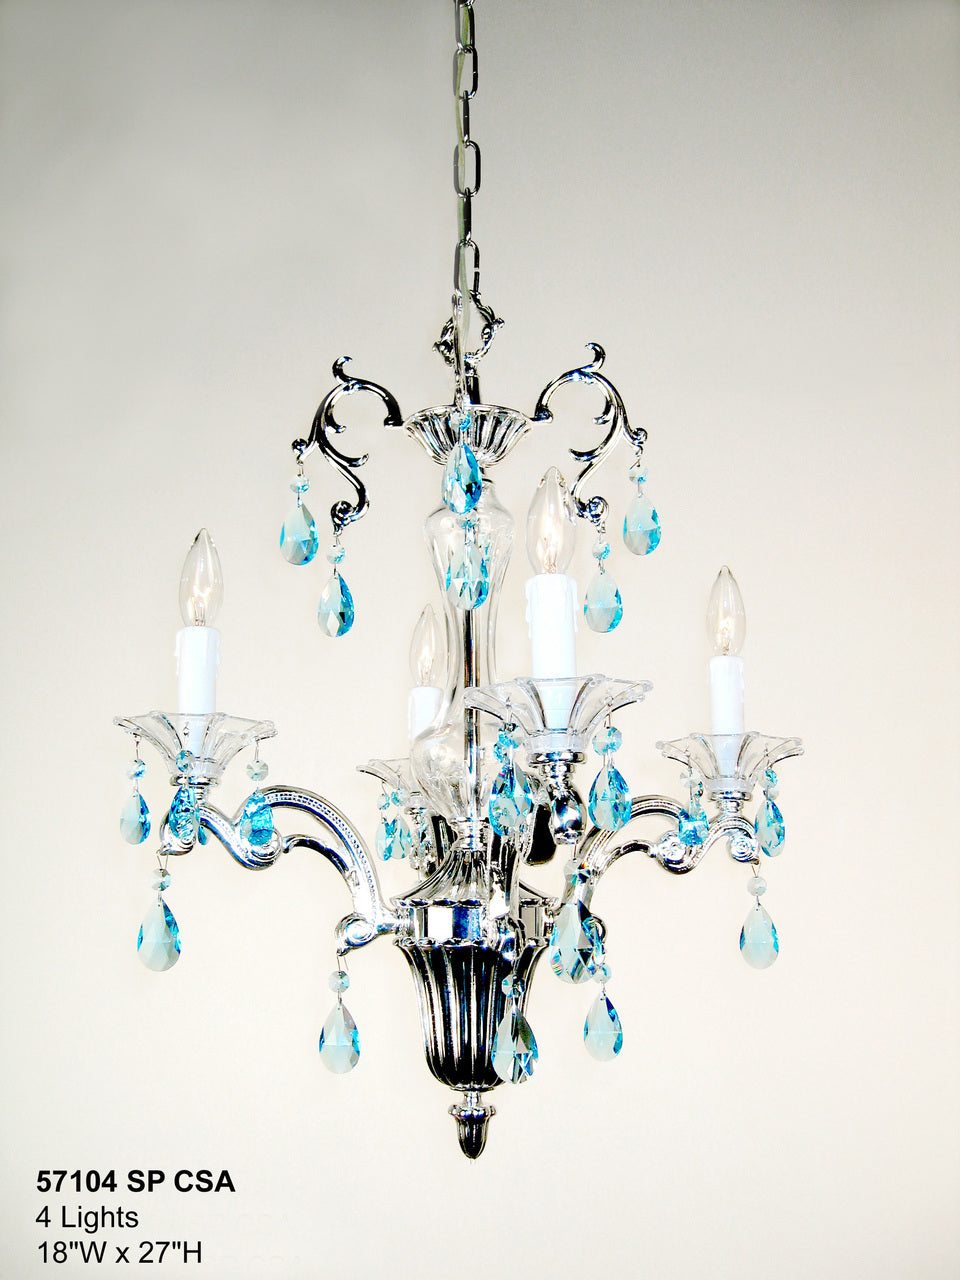 Classic Lighting 57104 SP CSA Via Firenze Crystal Mini Chandelier in Silver (Imported from Spain)